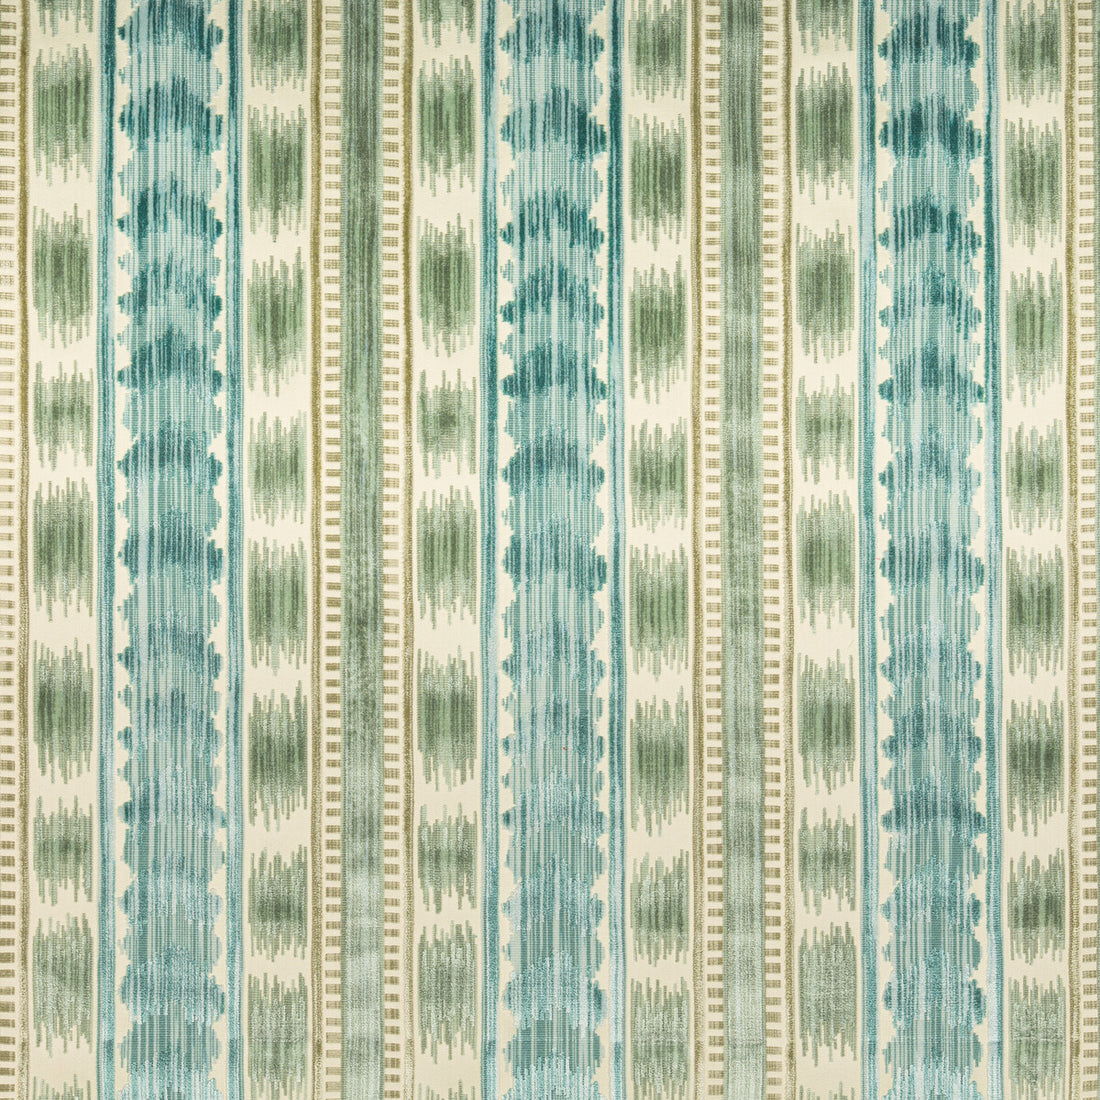 Bayeaux Velvet fabric in aqua color - pattern 8020117.133.0 - by Brunschwig &amp; Fils in the Chaumont Velvets collection